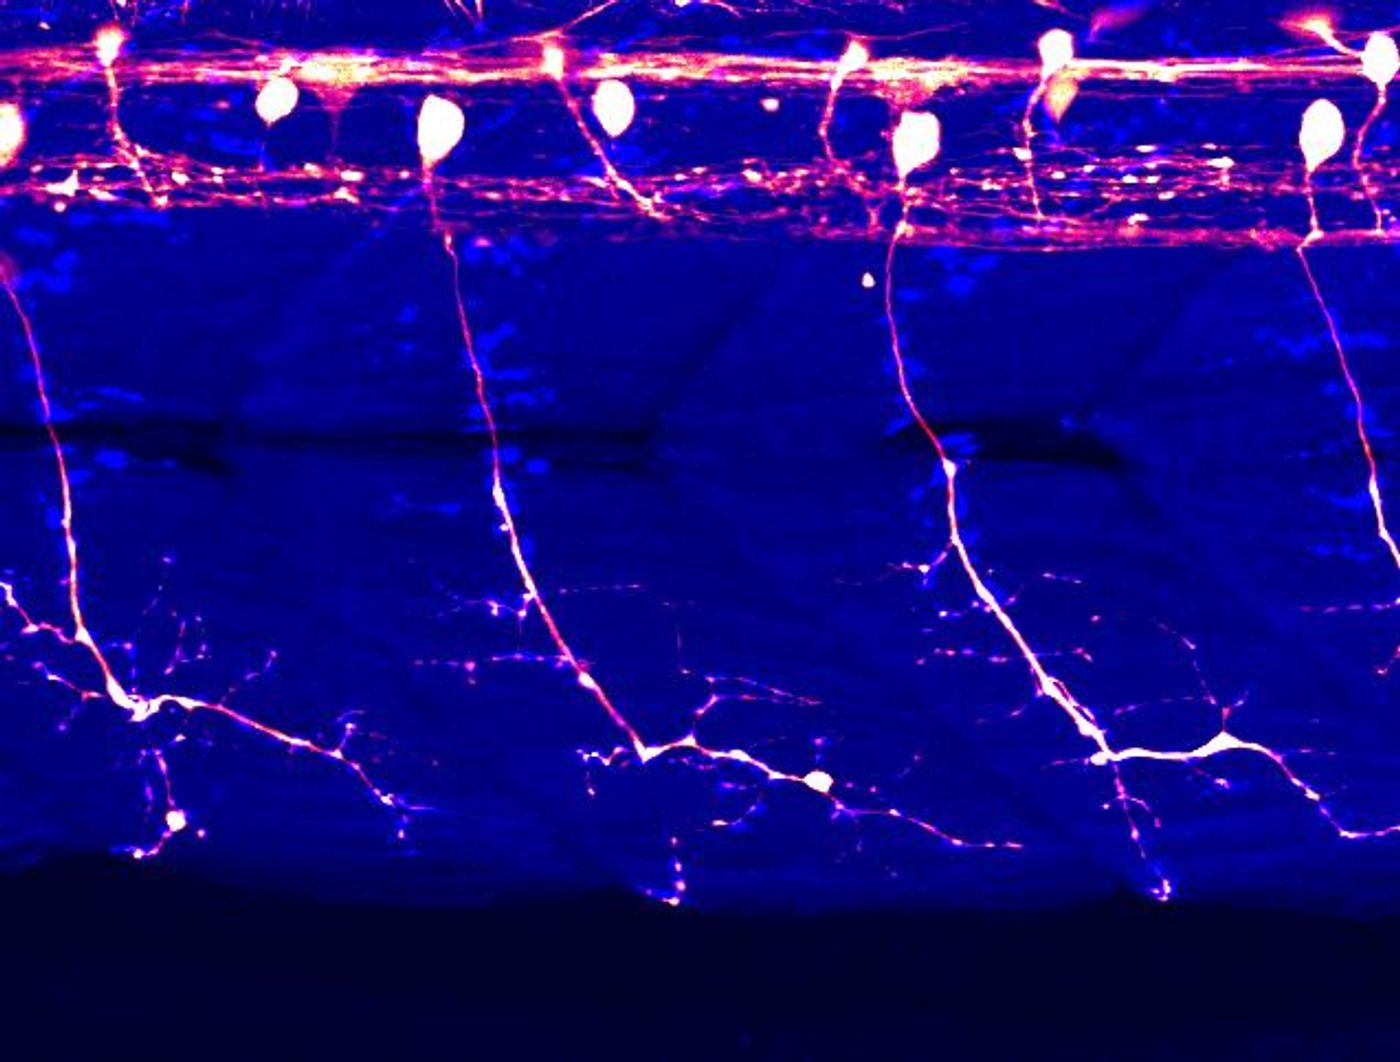 The whole cells of spinal motor neurons are visualized in an intact zebrafish larva (white/red). Skeletal muscles are shown in blue.  / Credit: (c) Kazuhide Asakawa